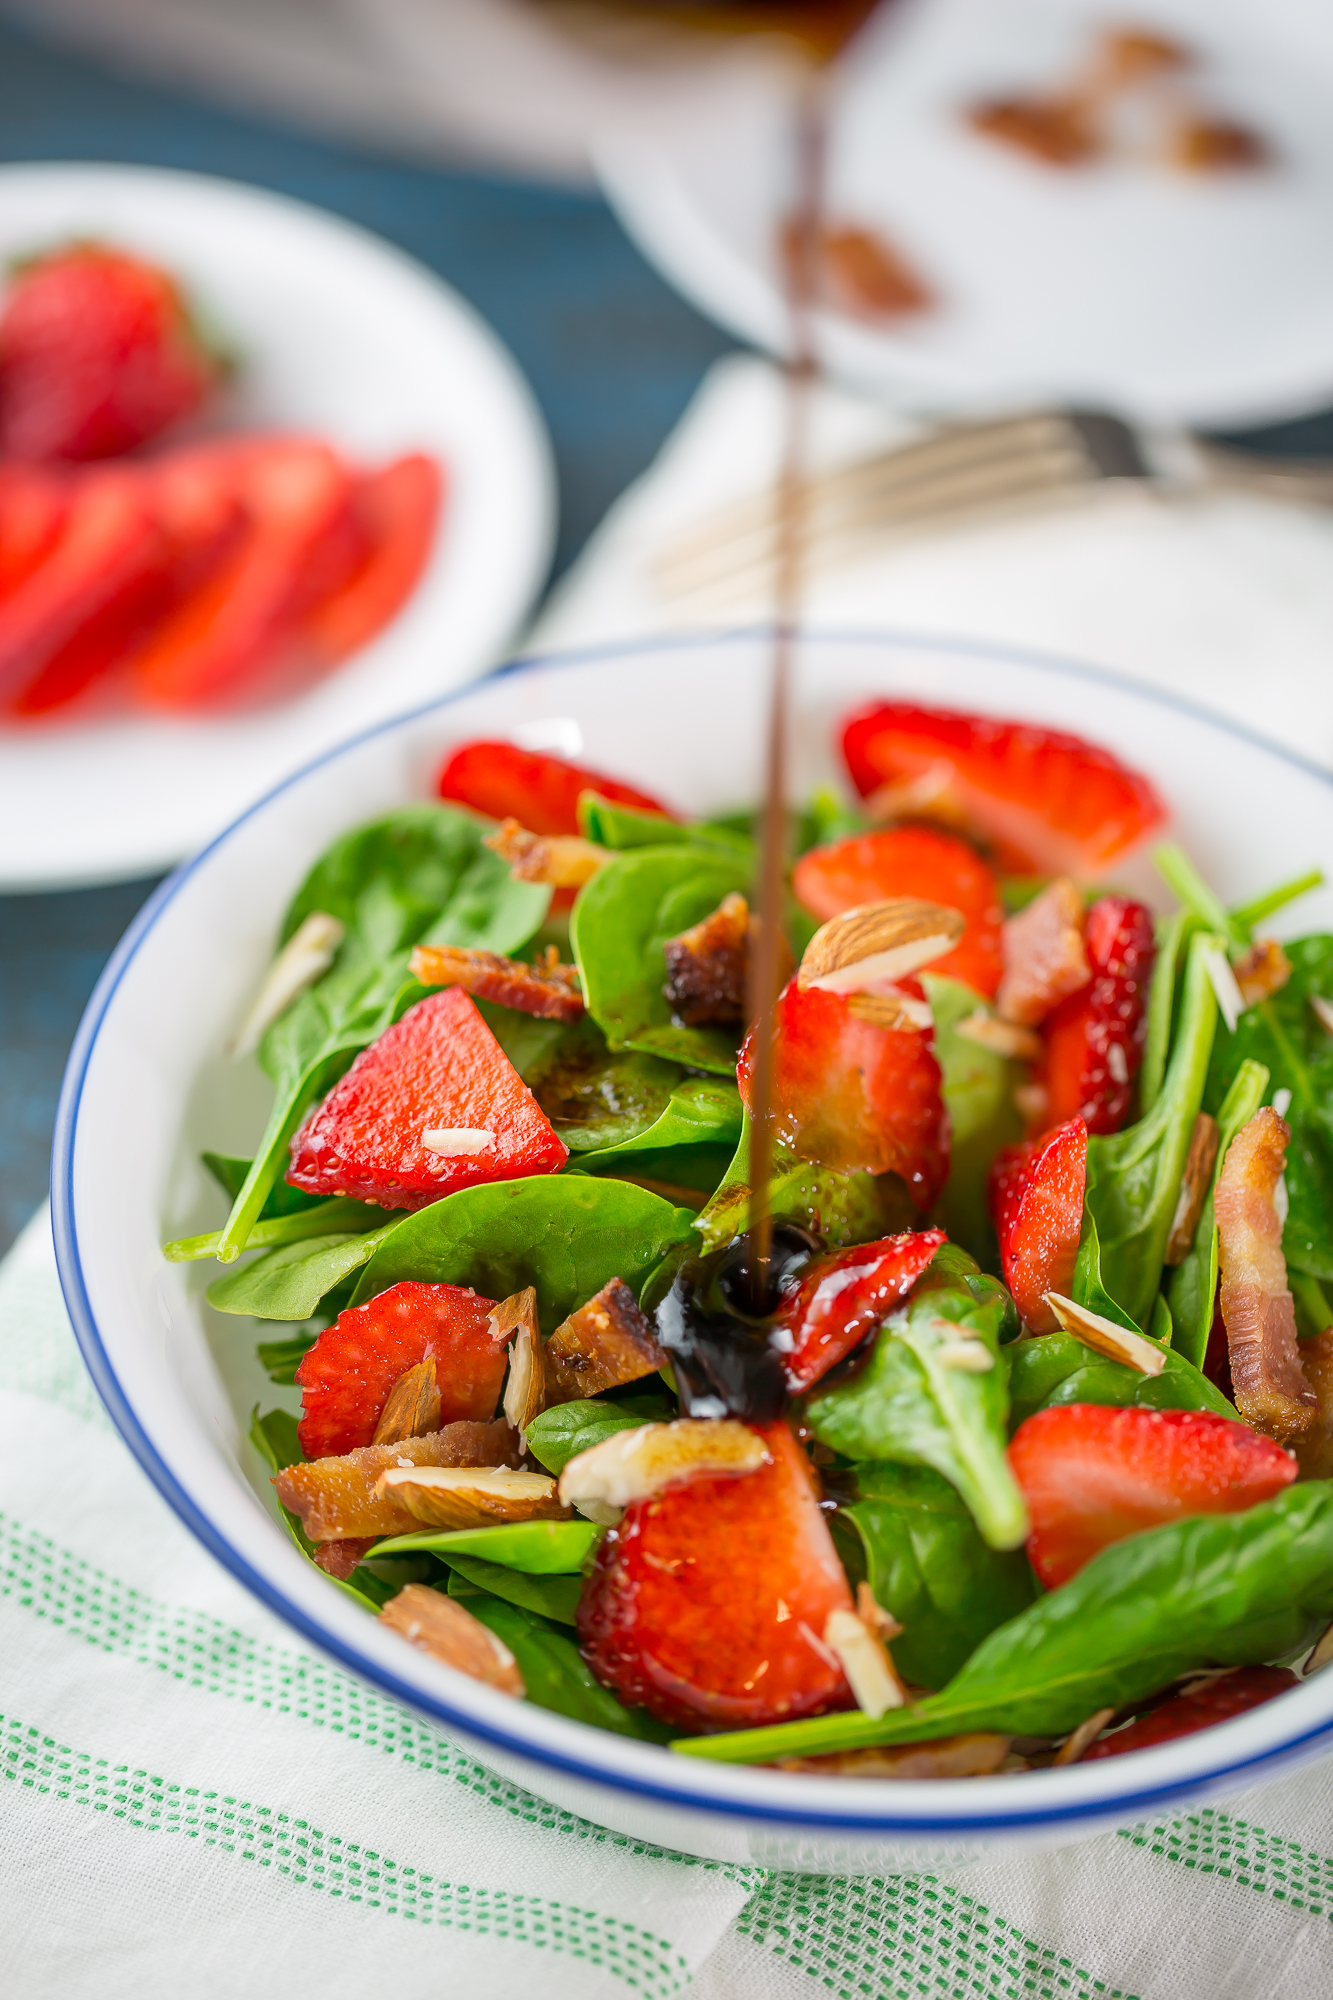 Simple Spinach Salad with Strawberries